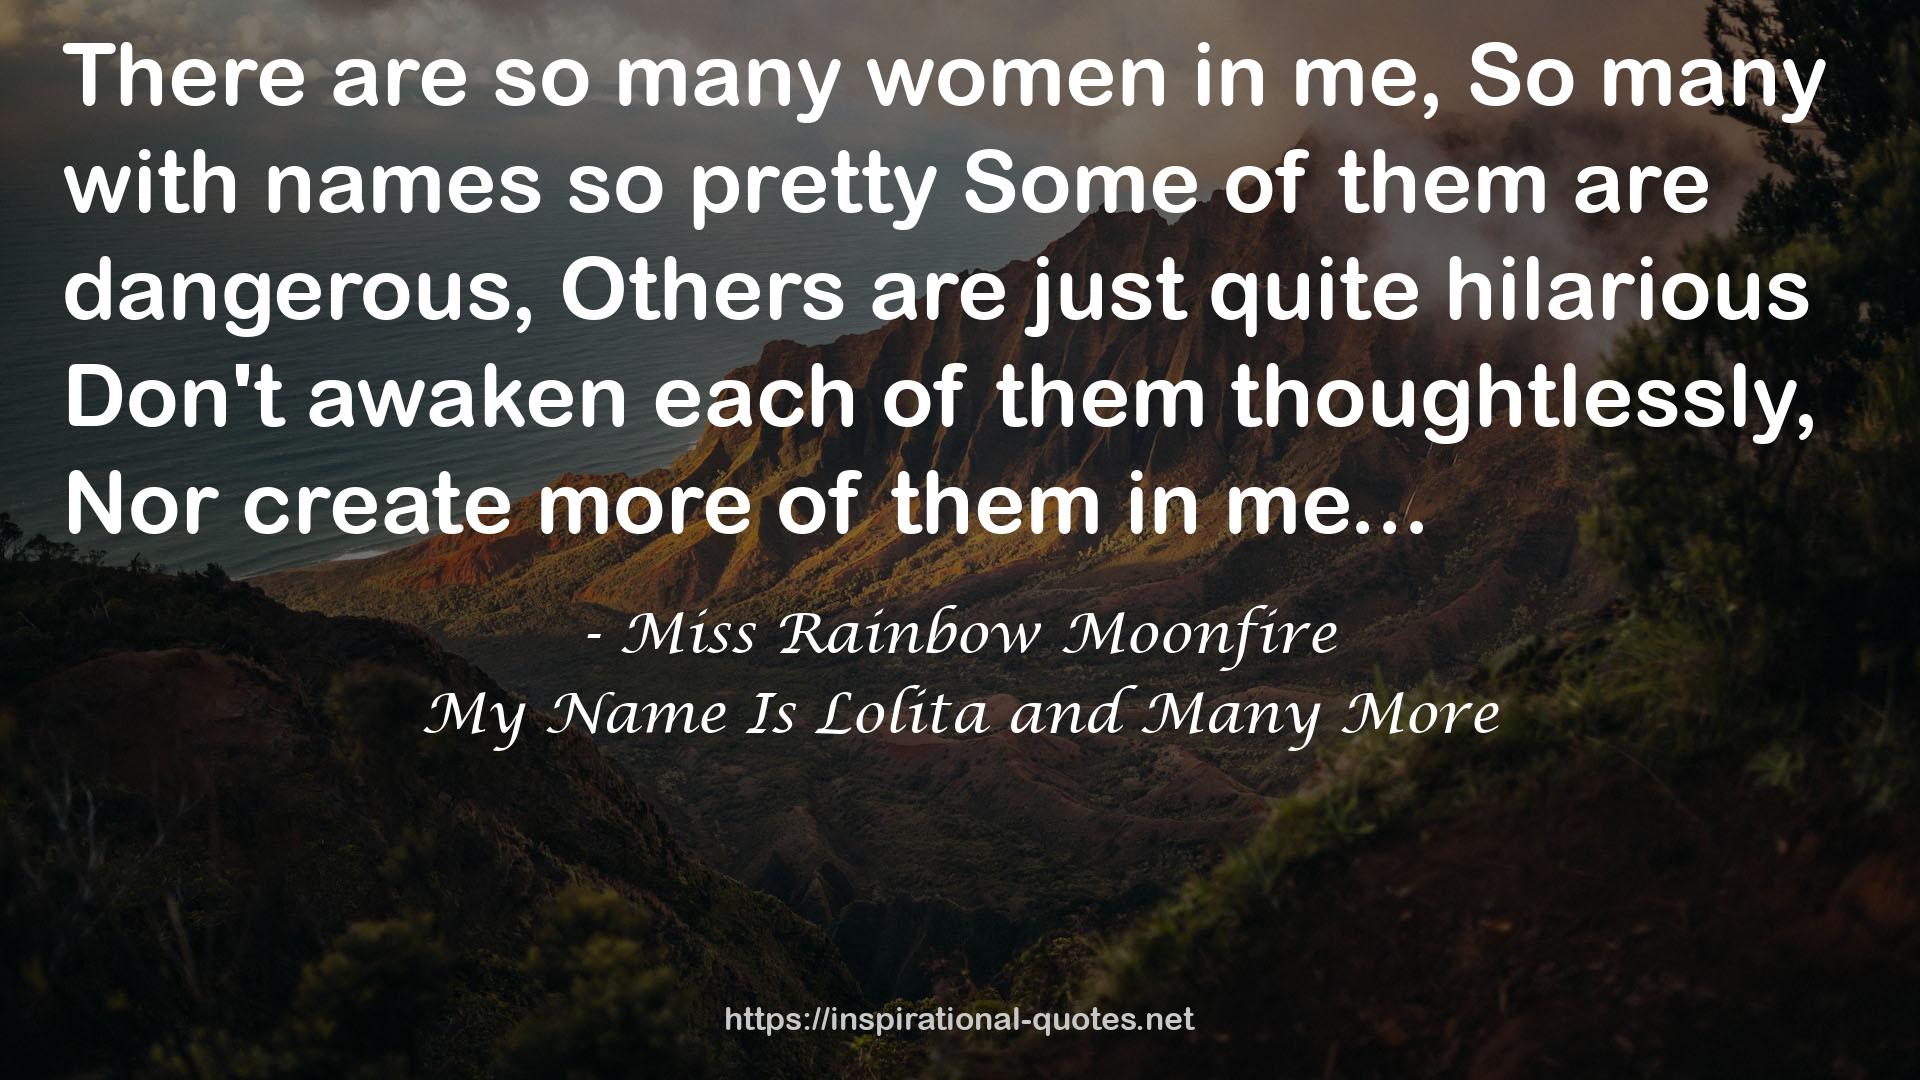 My Name Is Lolita and Many More QUOTES